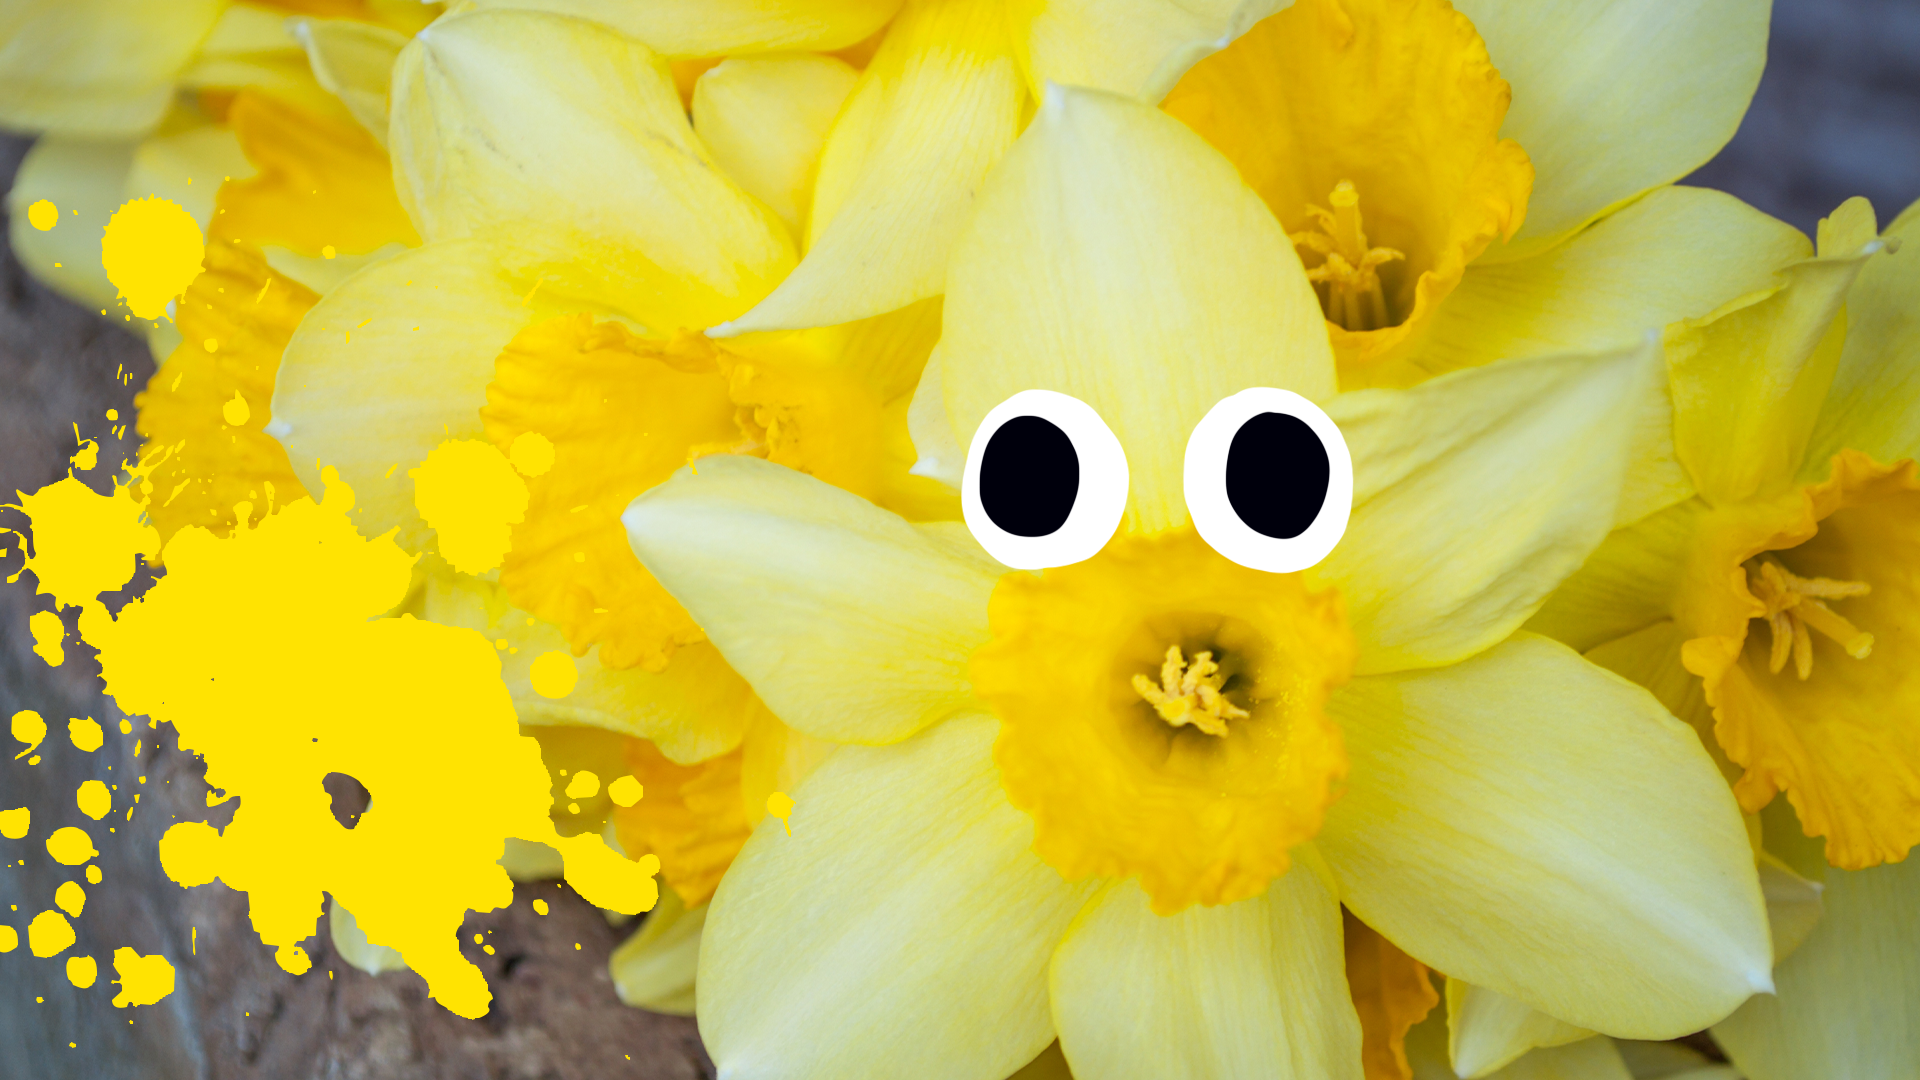 Flower with googly eyes